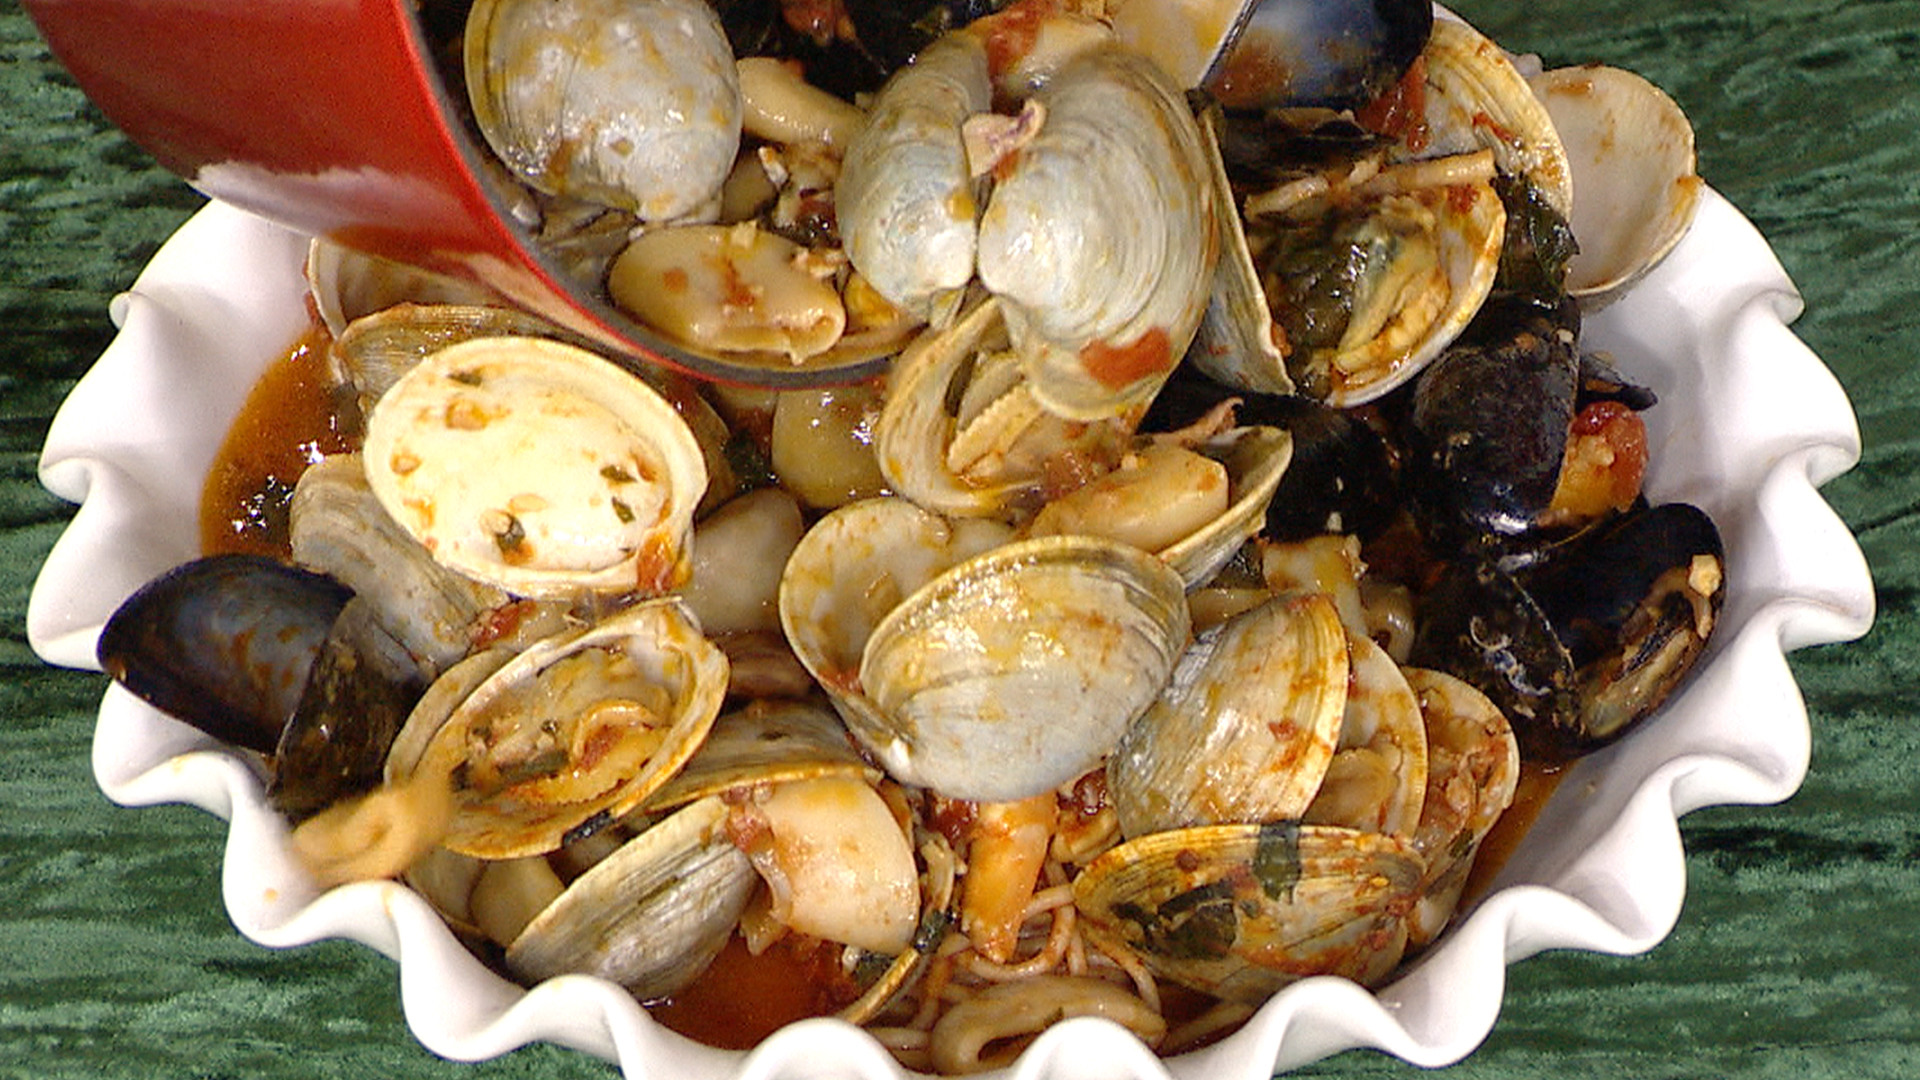 7 Fishes Christmas Eve Italian Recipes
 Sal Scognamillo shares his Feast of the Seven Fishes